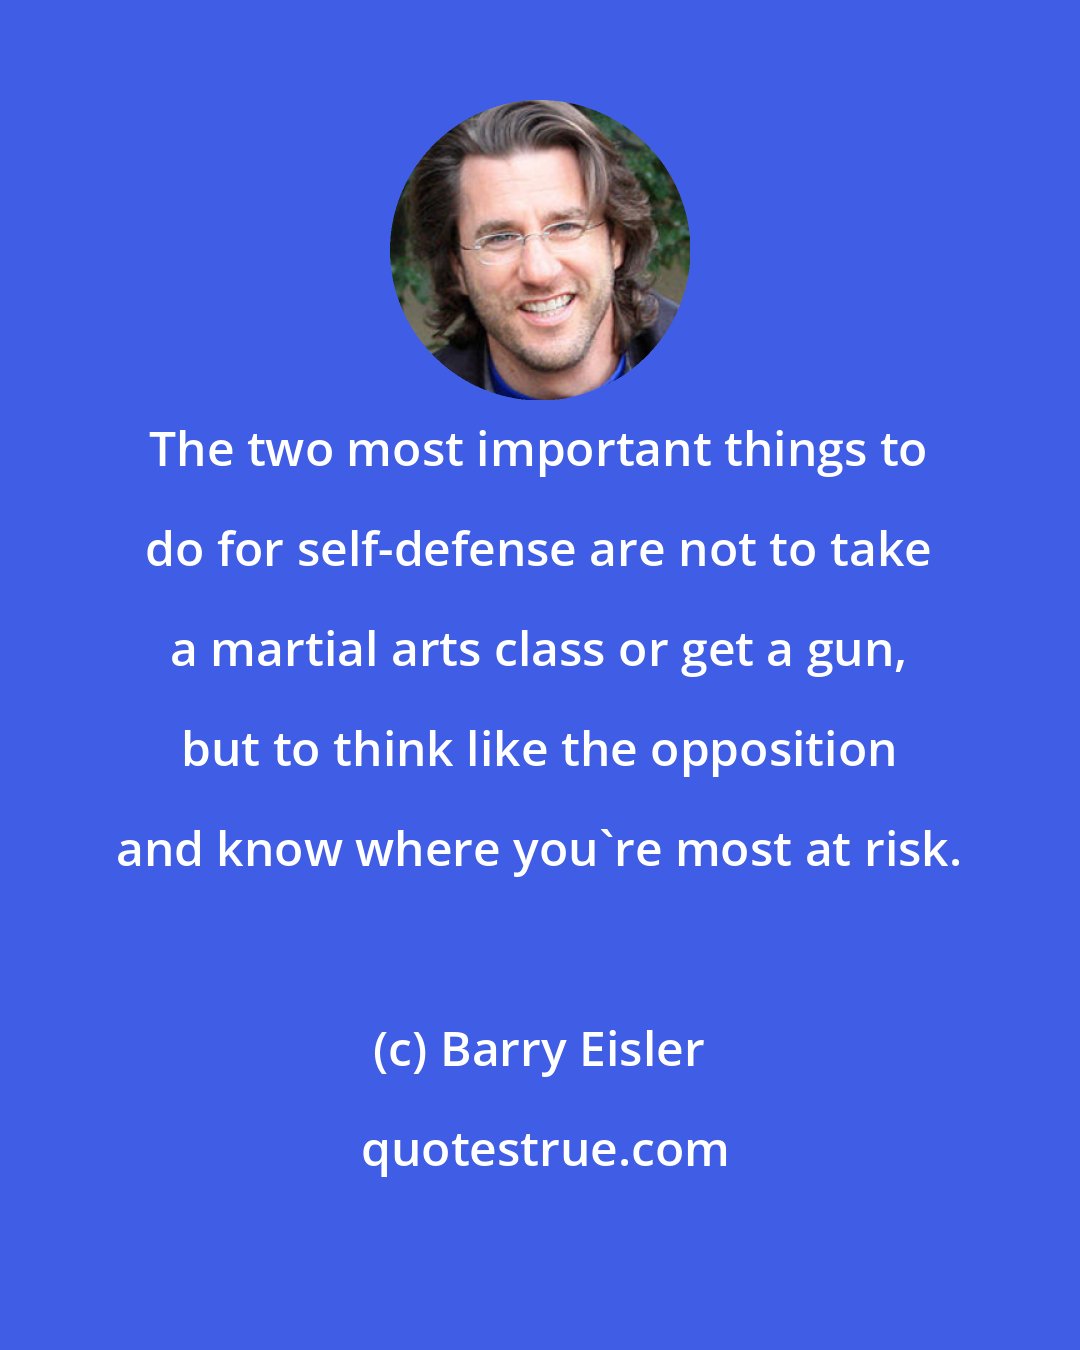 Barry Eisler: The two most important things to do for self-defense are not to take a martial arts class or get a gun, but to think like the opposition and know where you're most at risk.